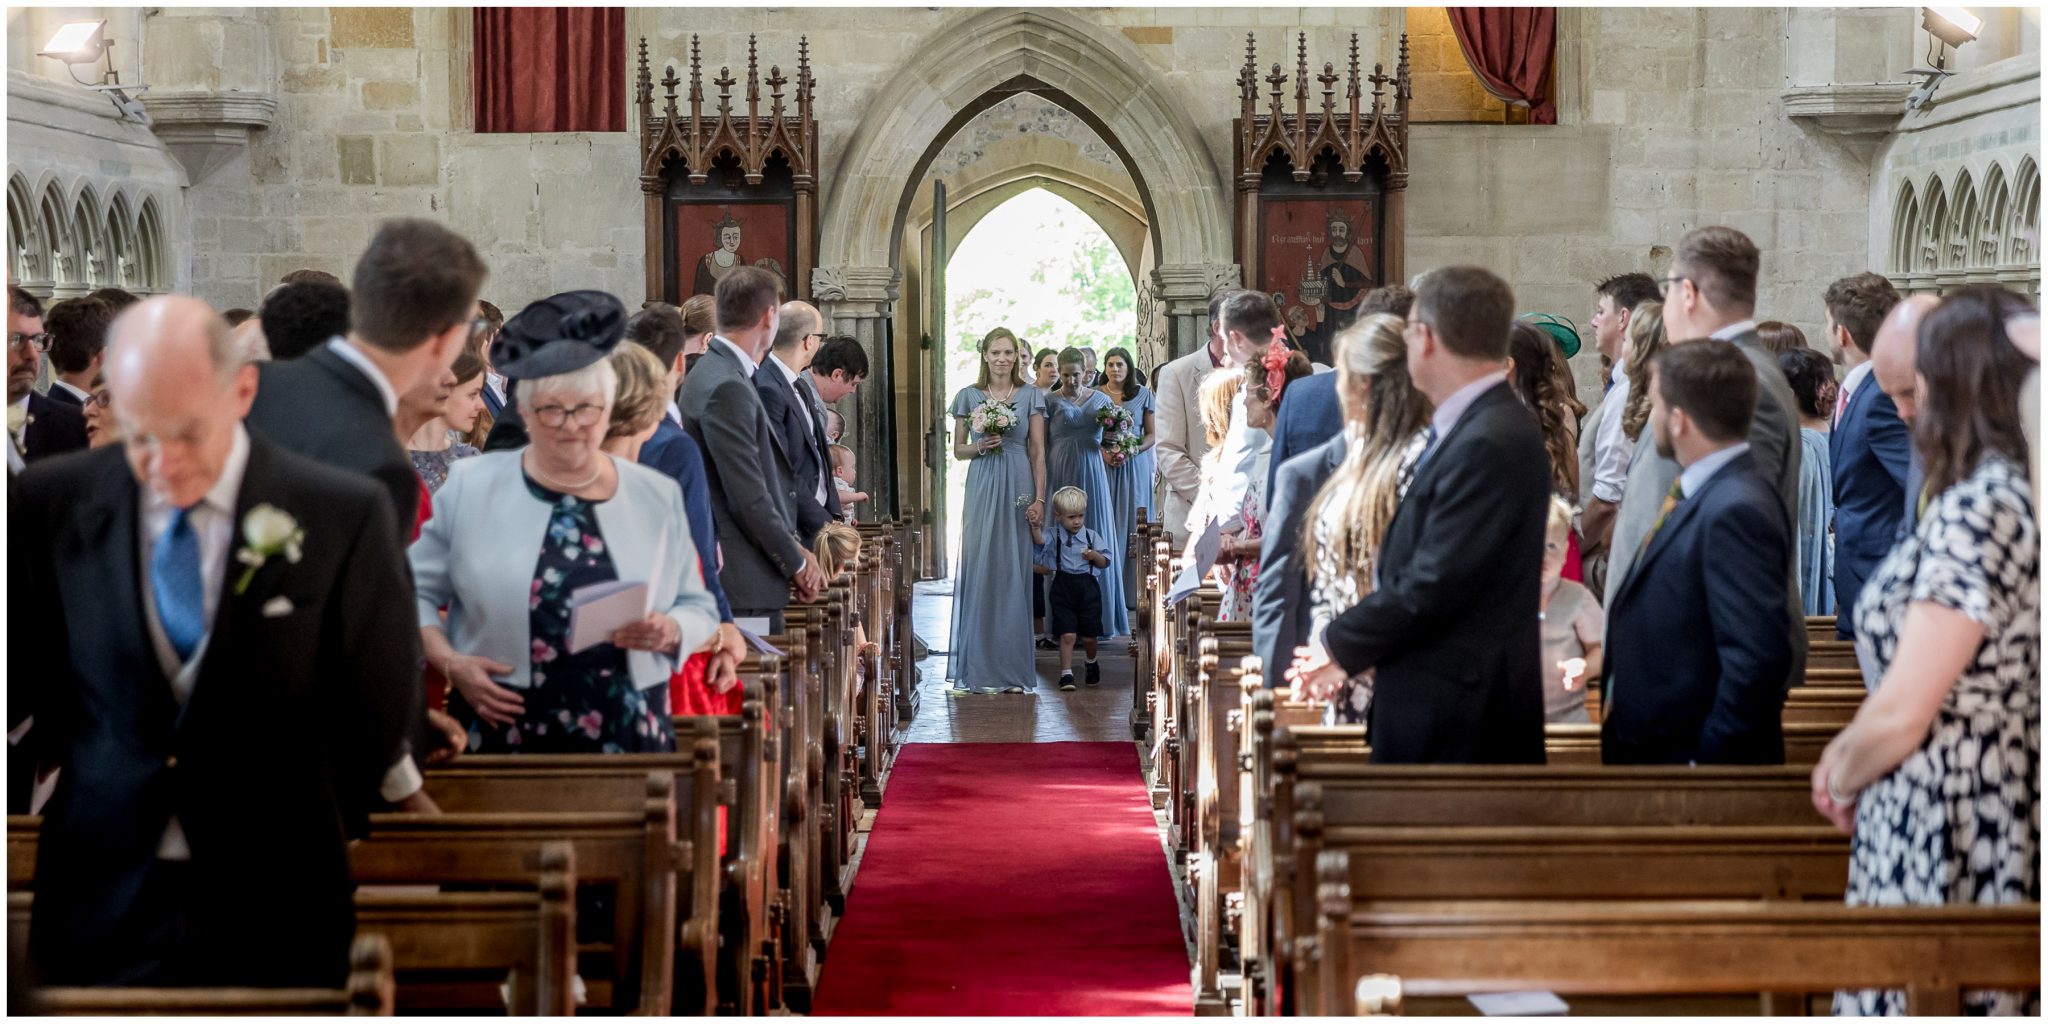 The bridal party makes their entrance to the church